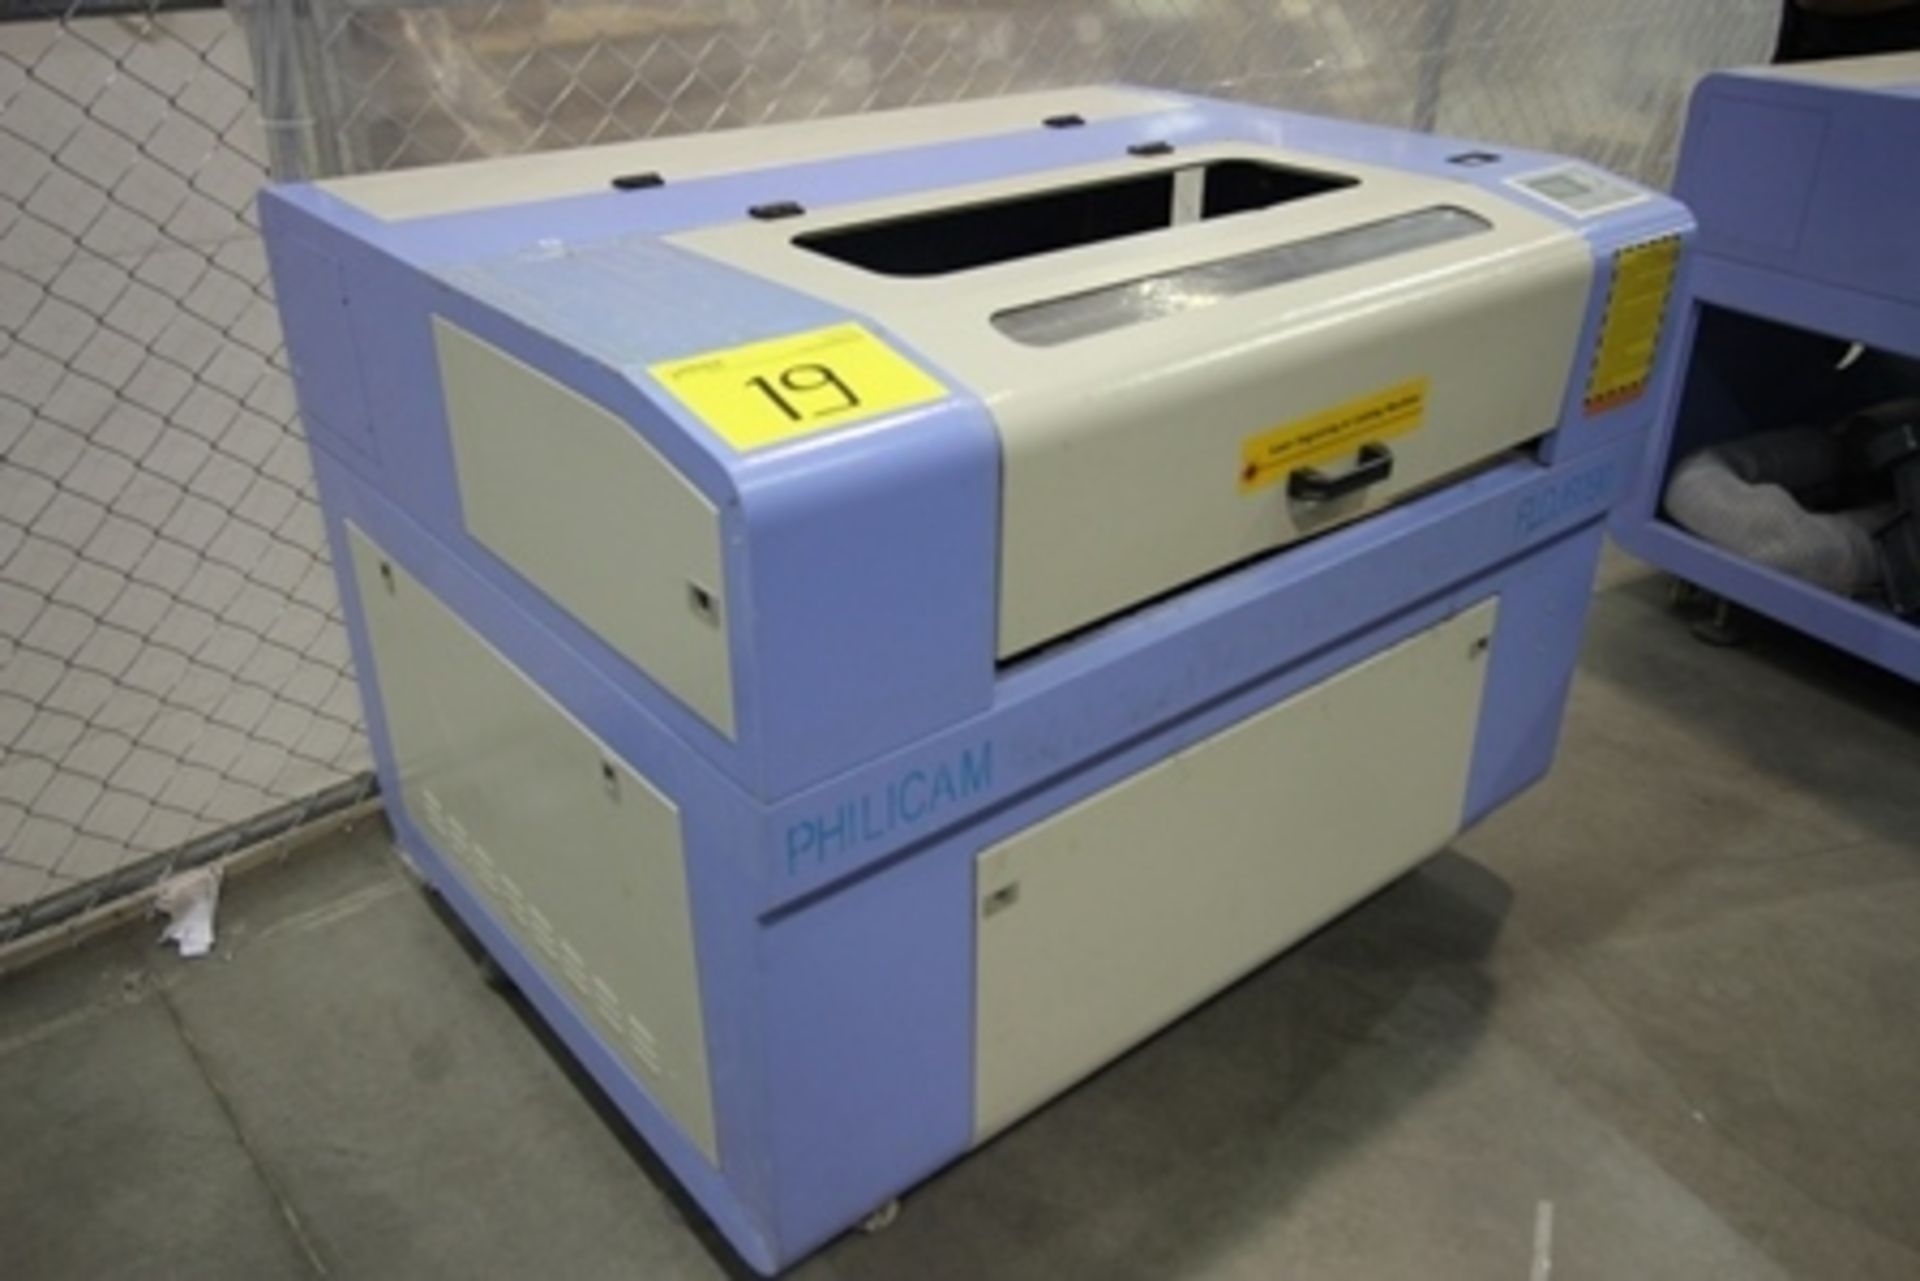 2016 Phillican CO2 laser engraver and cutting machine, model 6090. Laser power: 80w, 2Kw. - Image 2 of 18